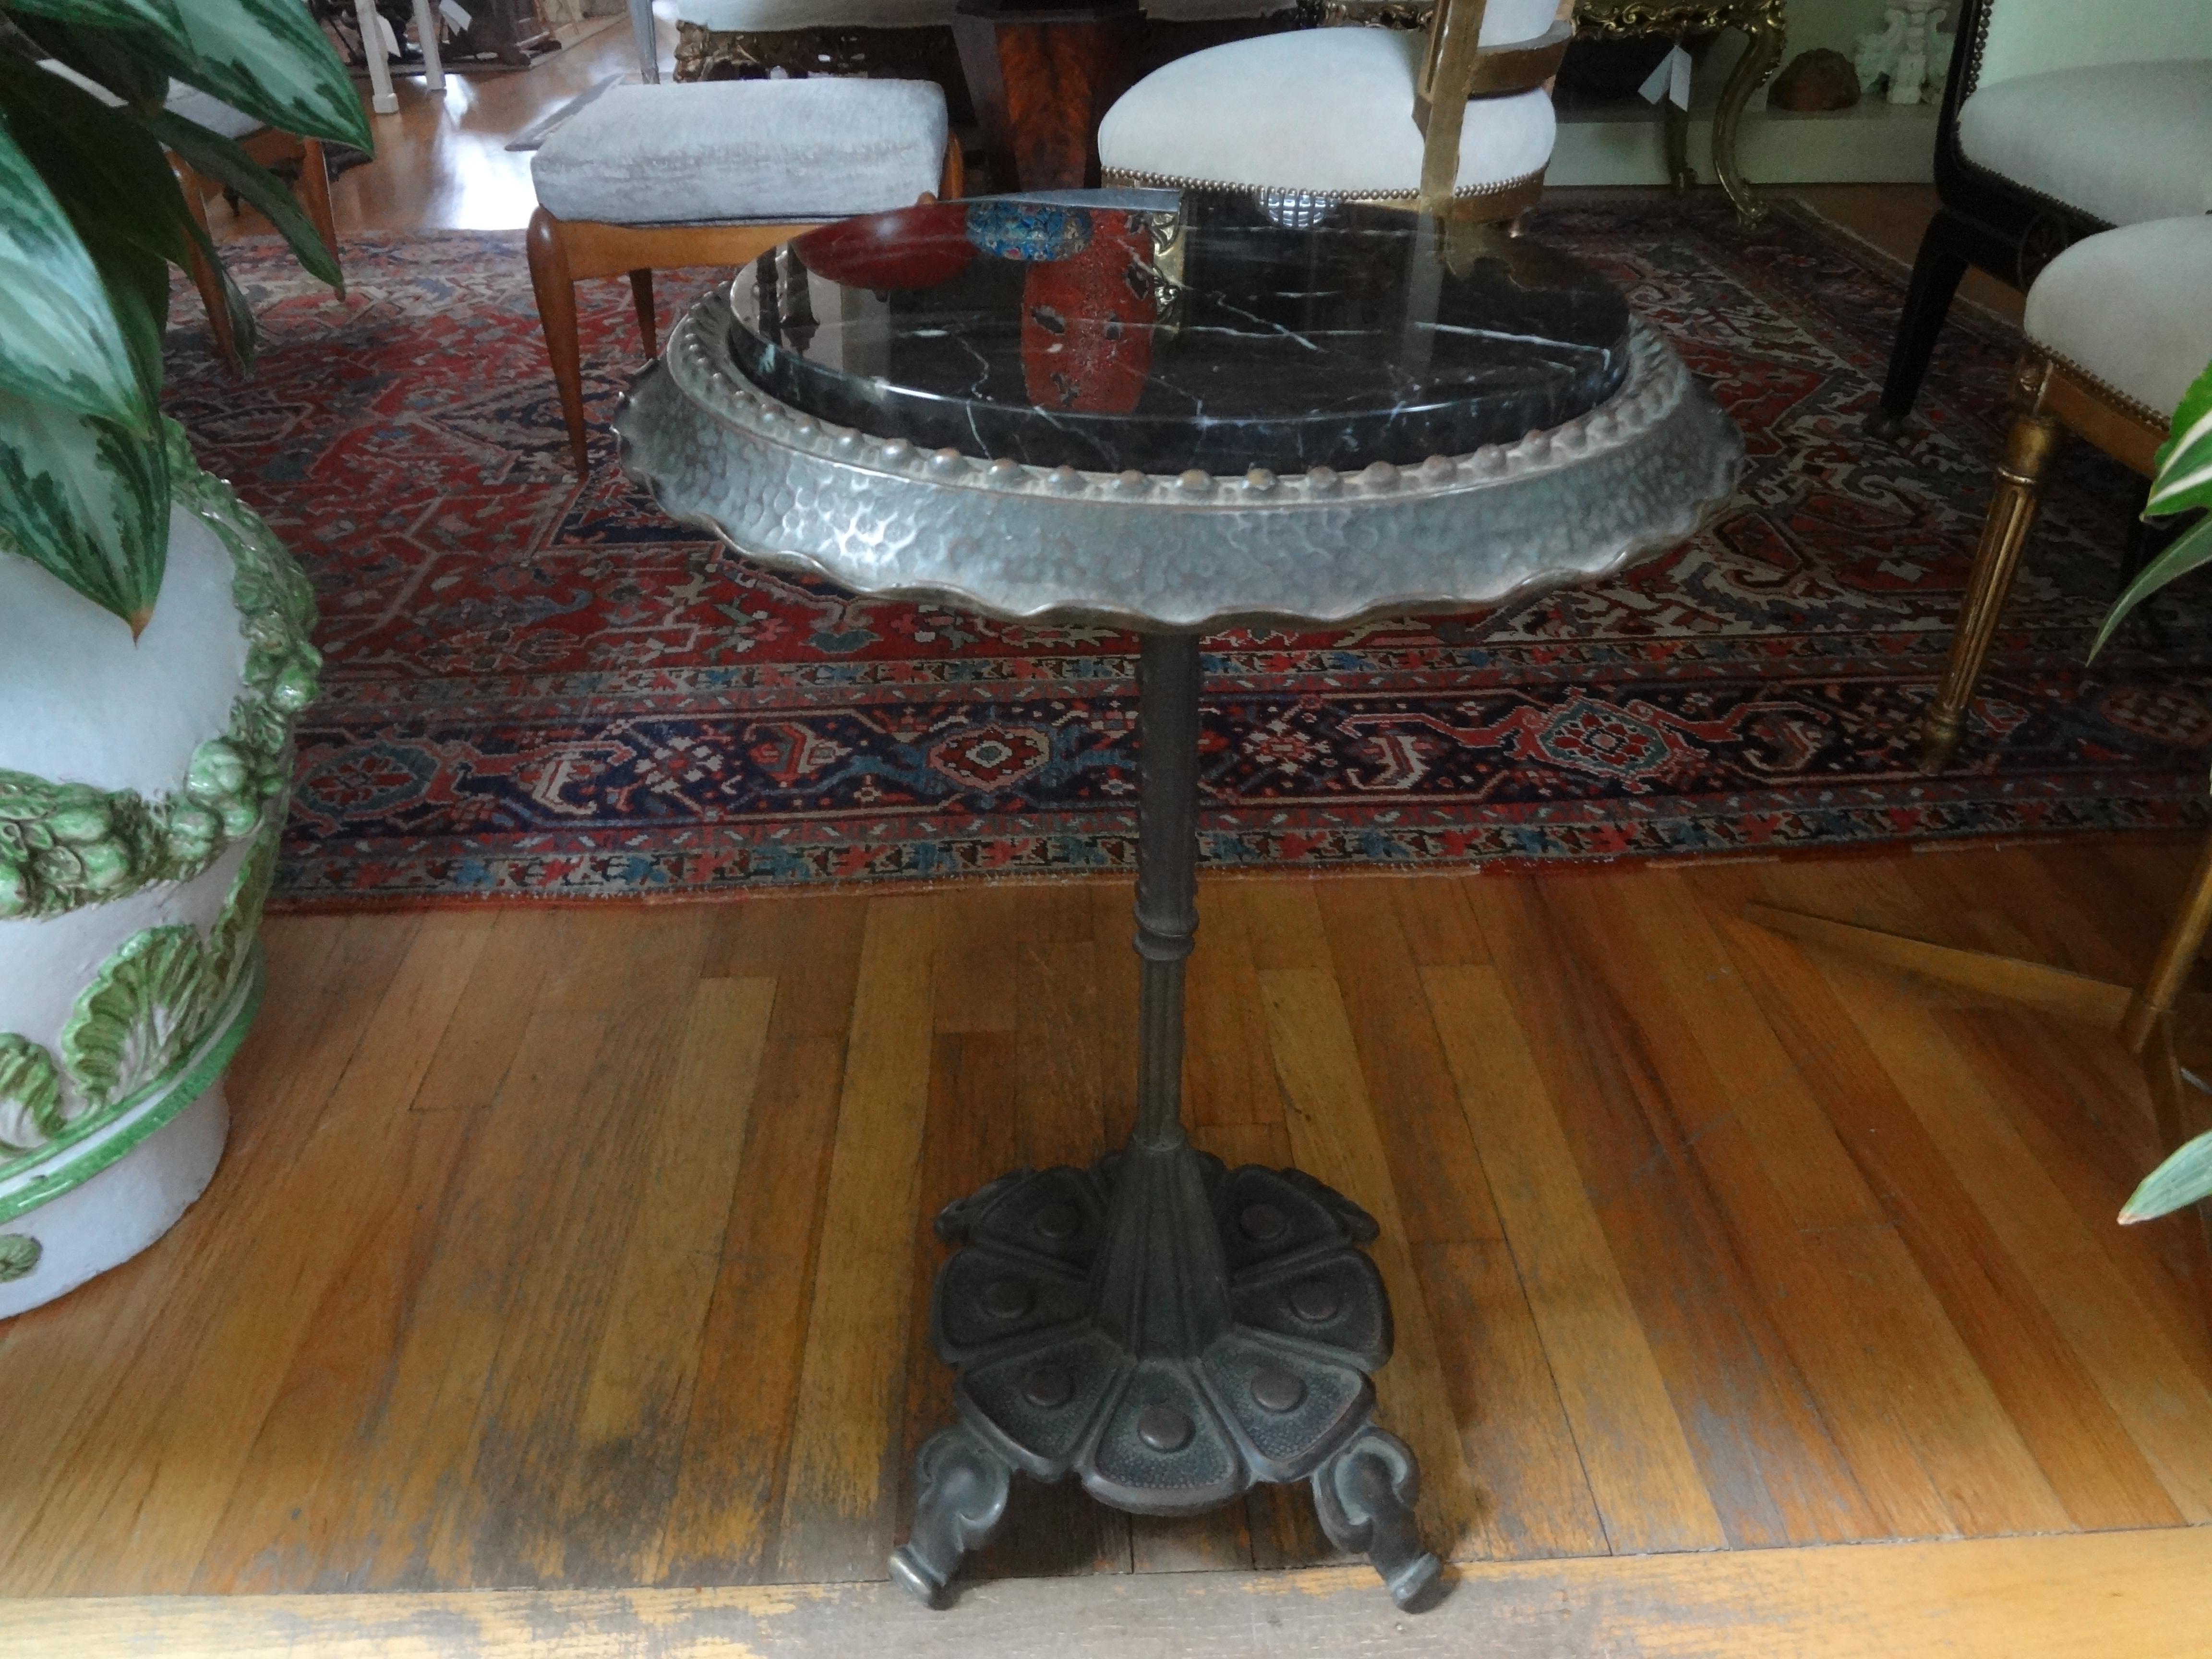 Fantastic stylized Art Deco iron table with a marble top. This stunning Edgar Brandt style Art Deco pedestal table is the perfect side table, drinks table, guéridon or cigarette table. Our table would work in a variety of interiors.